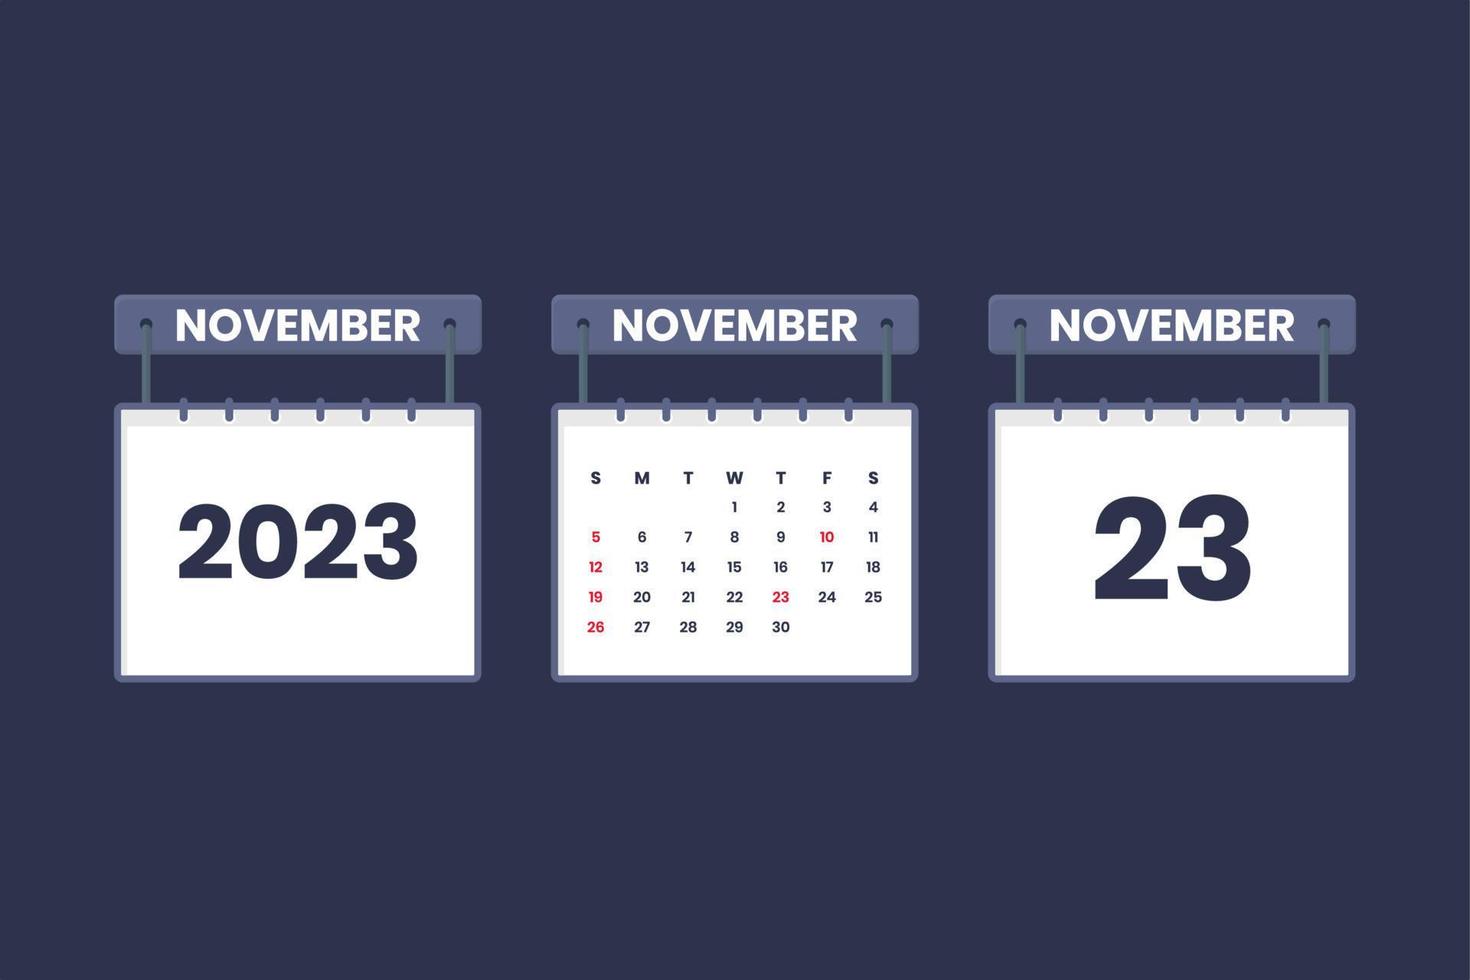 23 November 2023 calendar icon for schedule, appointment, important date concept vector